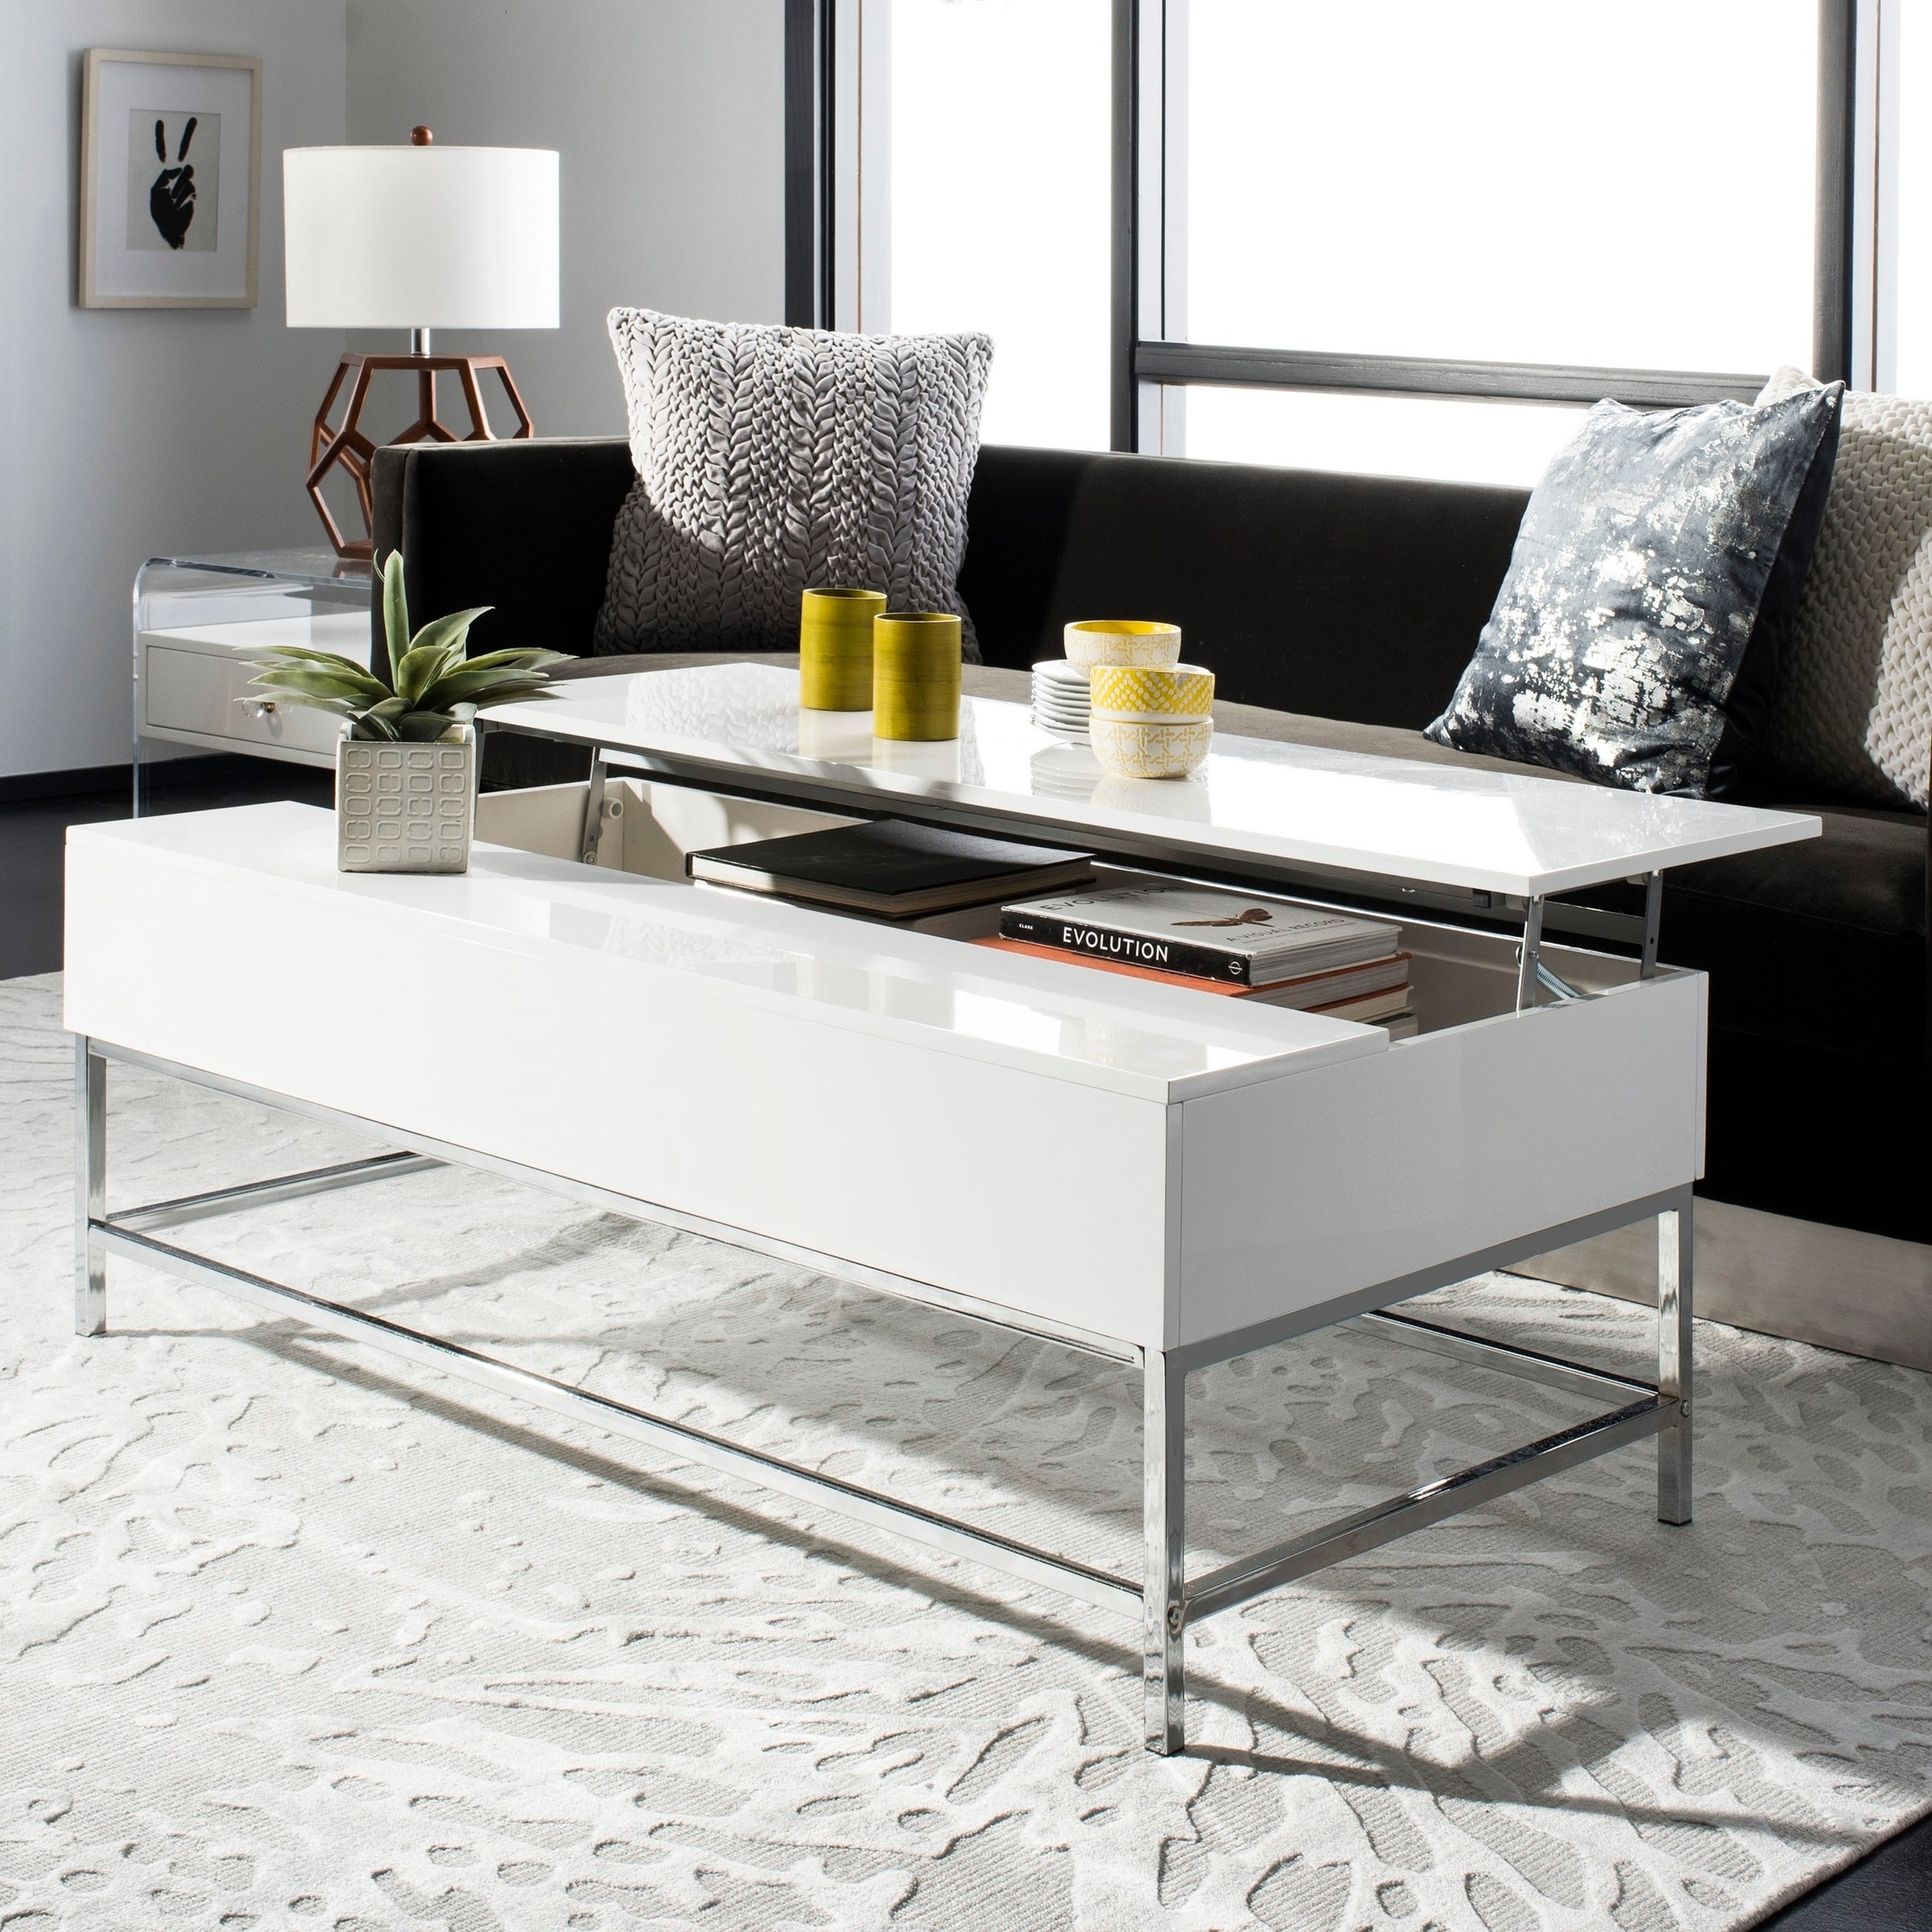 White Lift Top Coffee Table